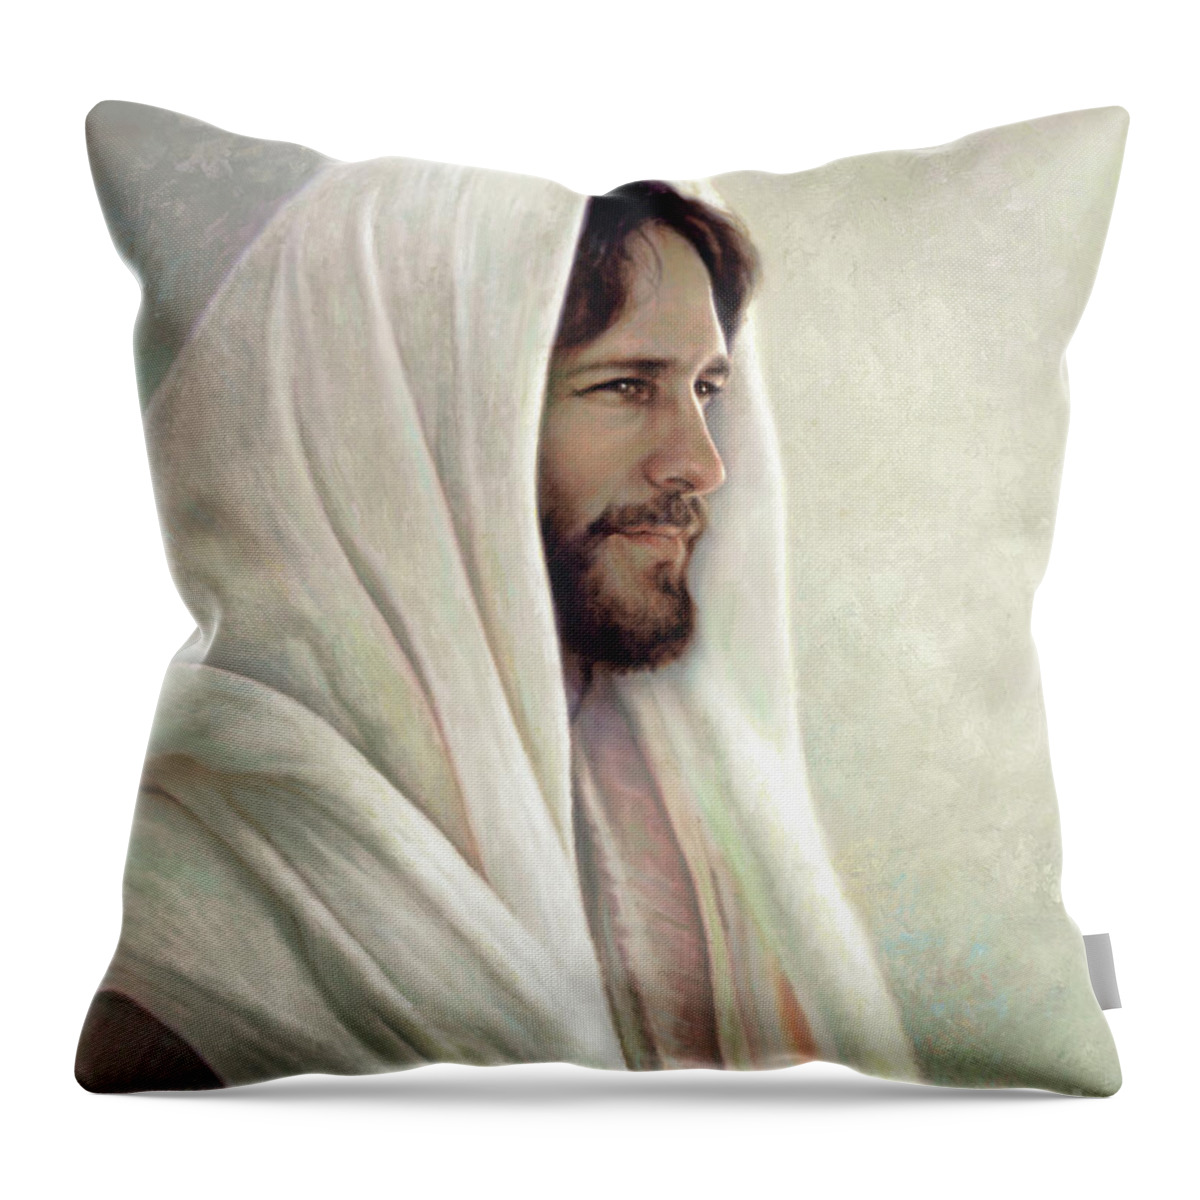 Lamb Of God Throw Pillow featuring the painting Lamb of God by Greg Olsen